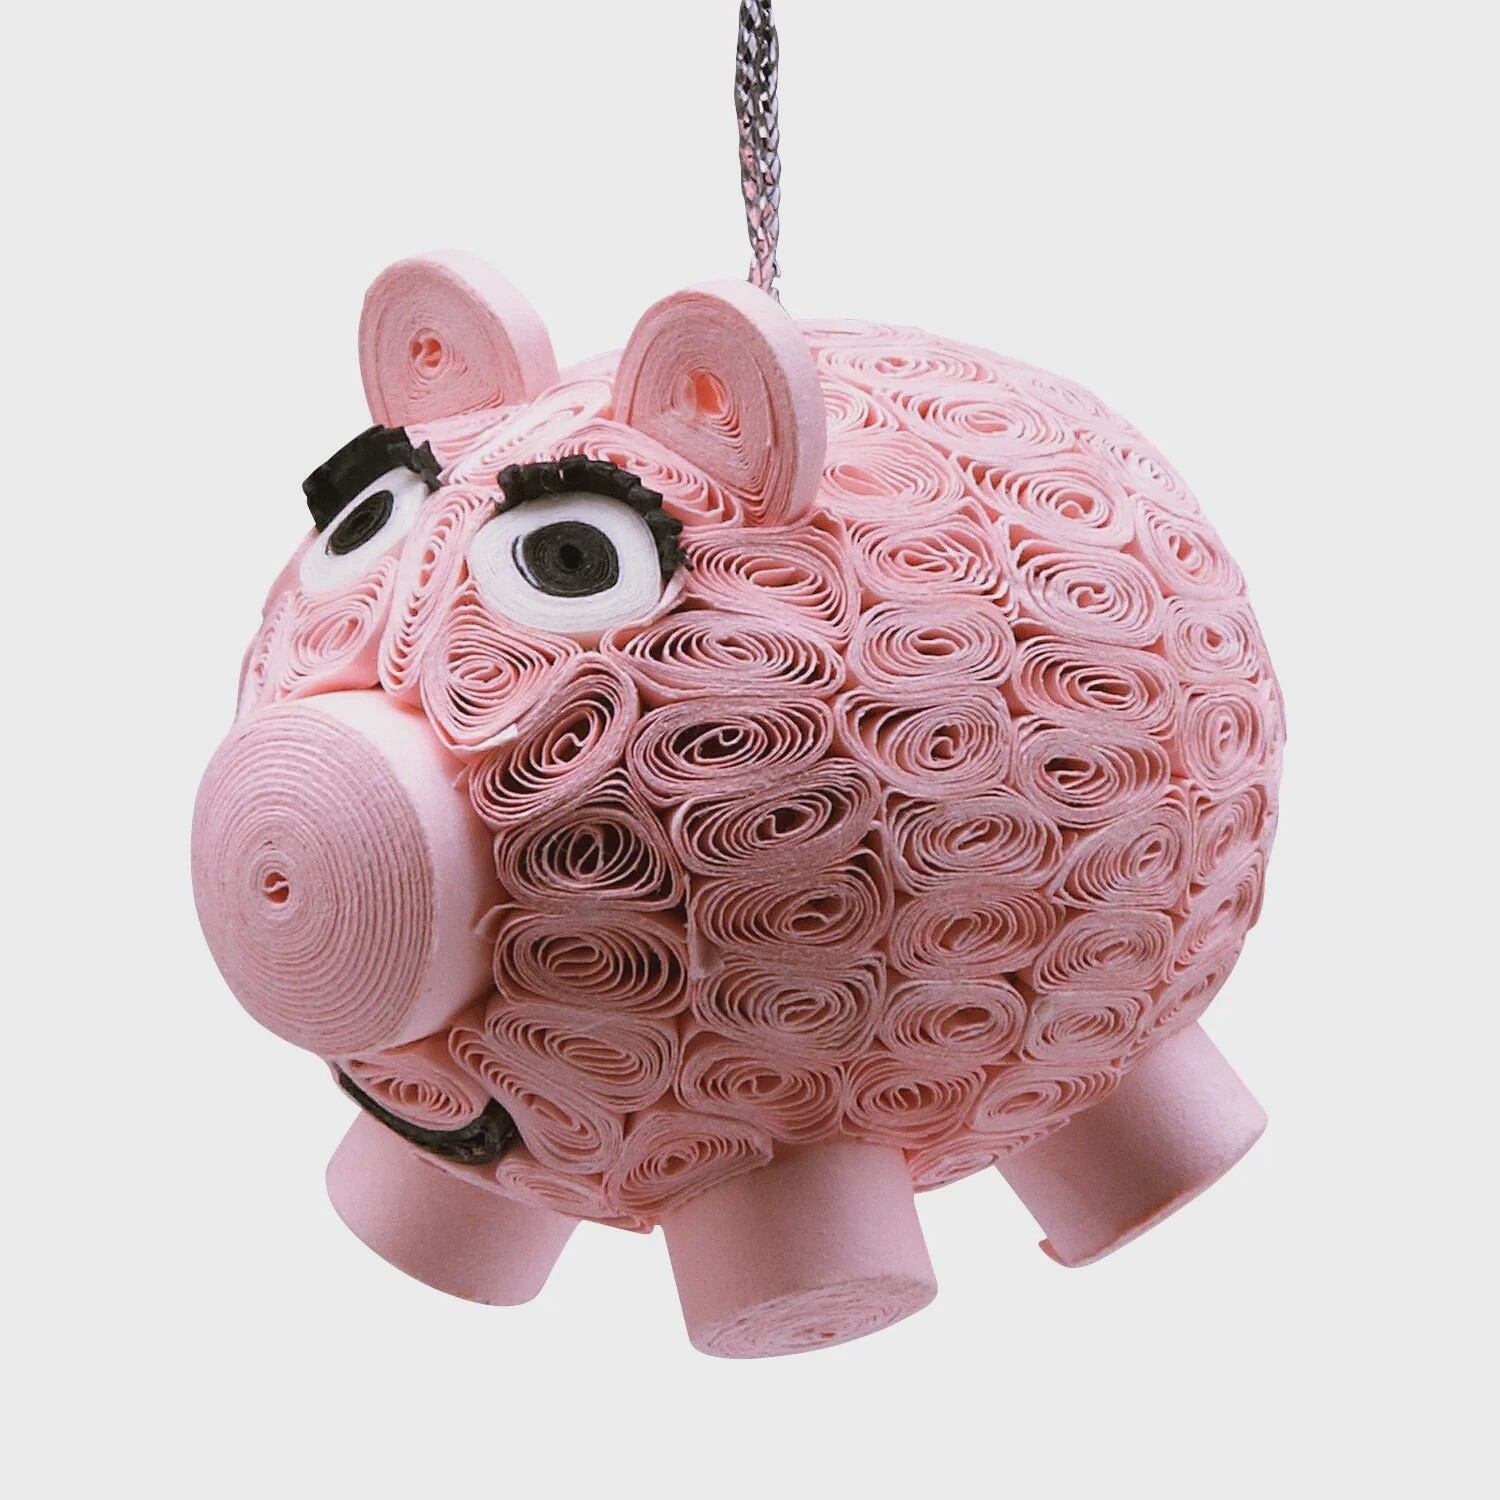 Smiling Pig Quilled Ornament